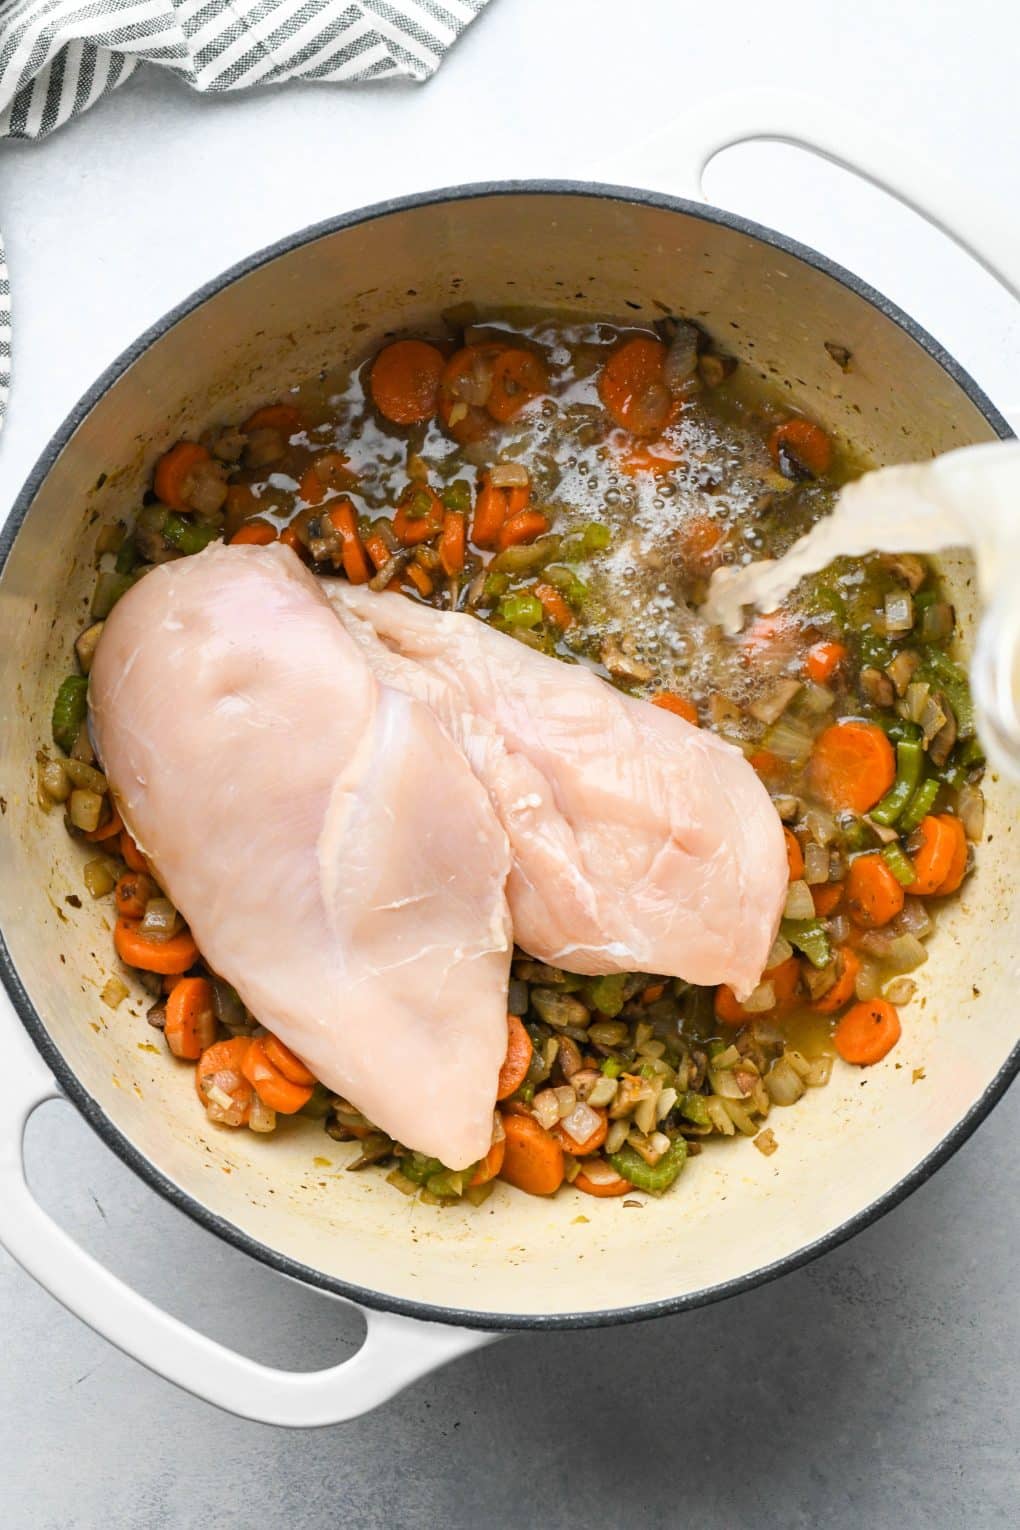 How to make Creamy Dairy Free Chicken and Cauliflower Rice Soup: Raw chicken breasts in soup pot with cooked veggies, a hand pouring in the chicken broth.